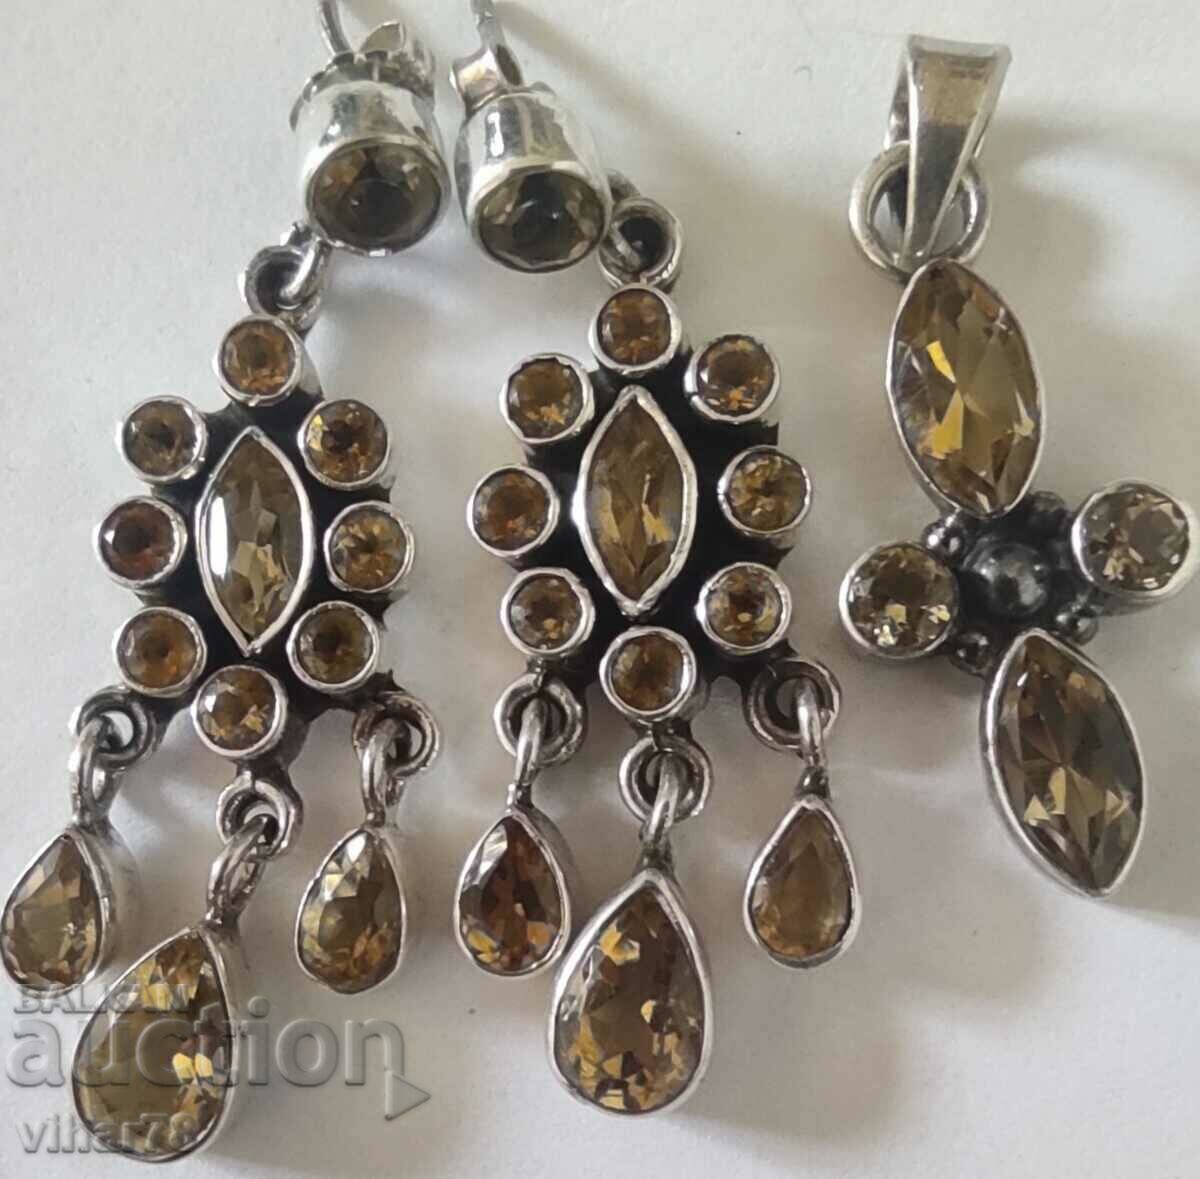 Very beautiful sterling silver set of citrine earrings and pendant